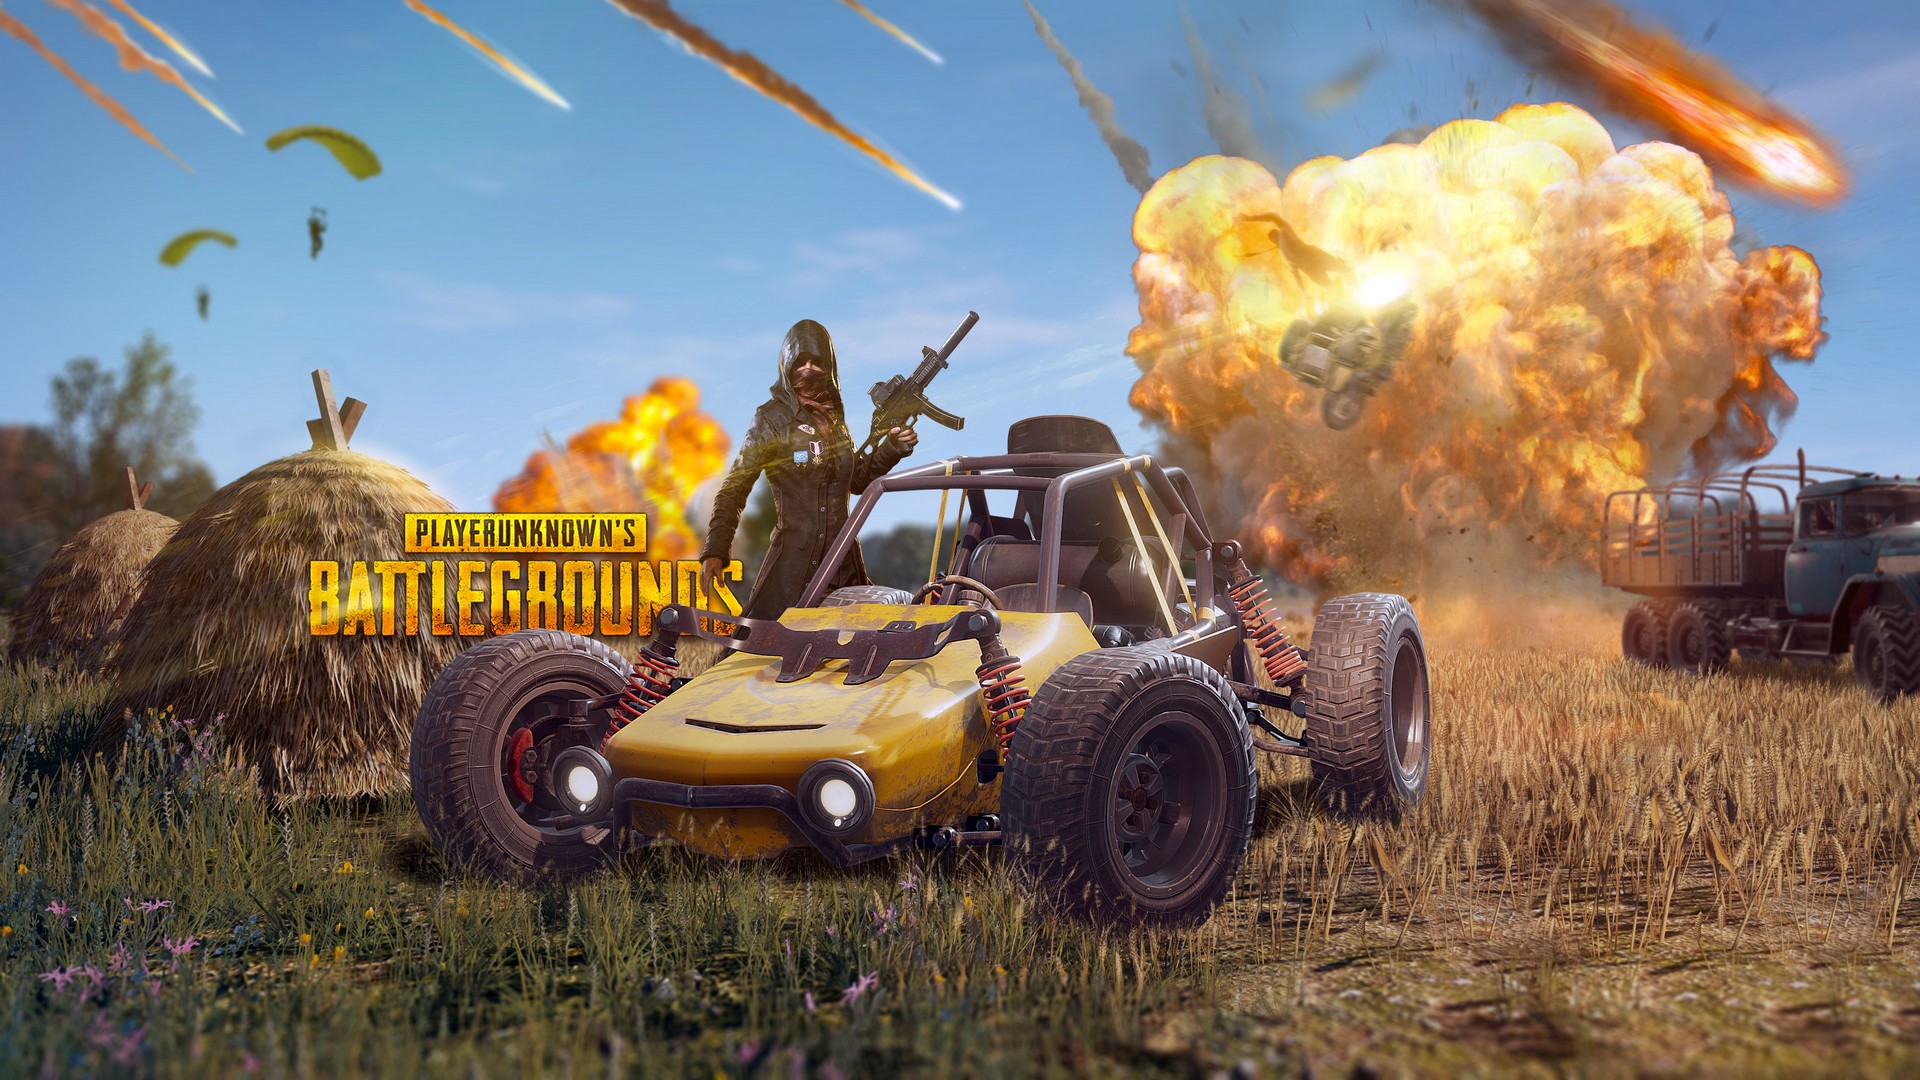 PUBG Xbox One Update Wallpaper with image resolution 1920x1080 pixel. You can use this wallpaper as background for your desktop Computer Screensavers, Android or iPhone smartphones